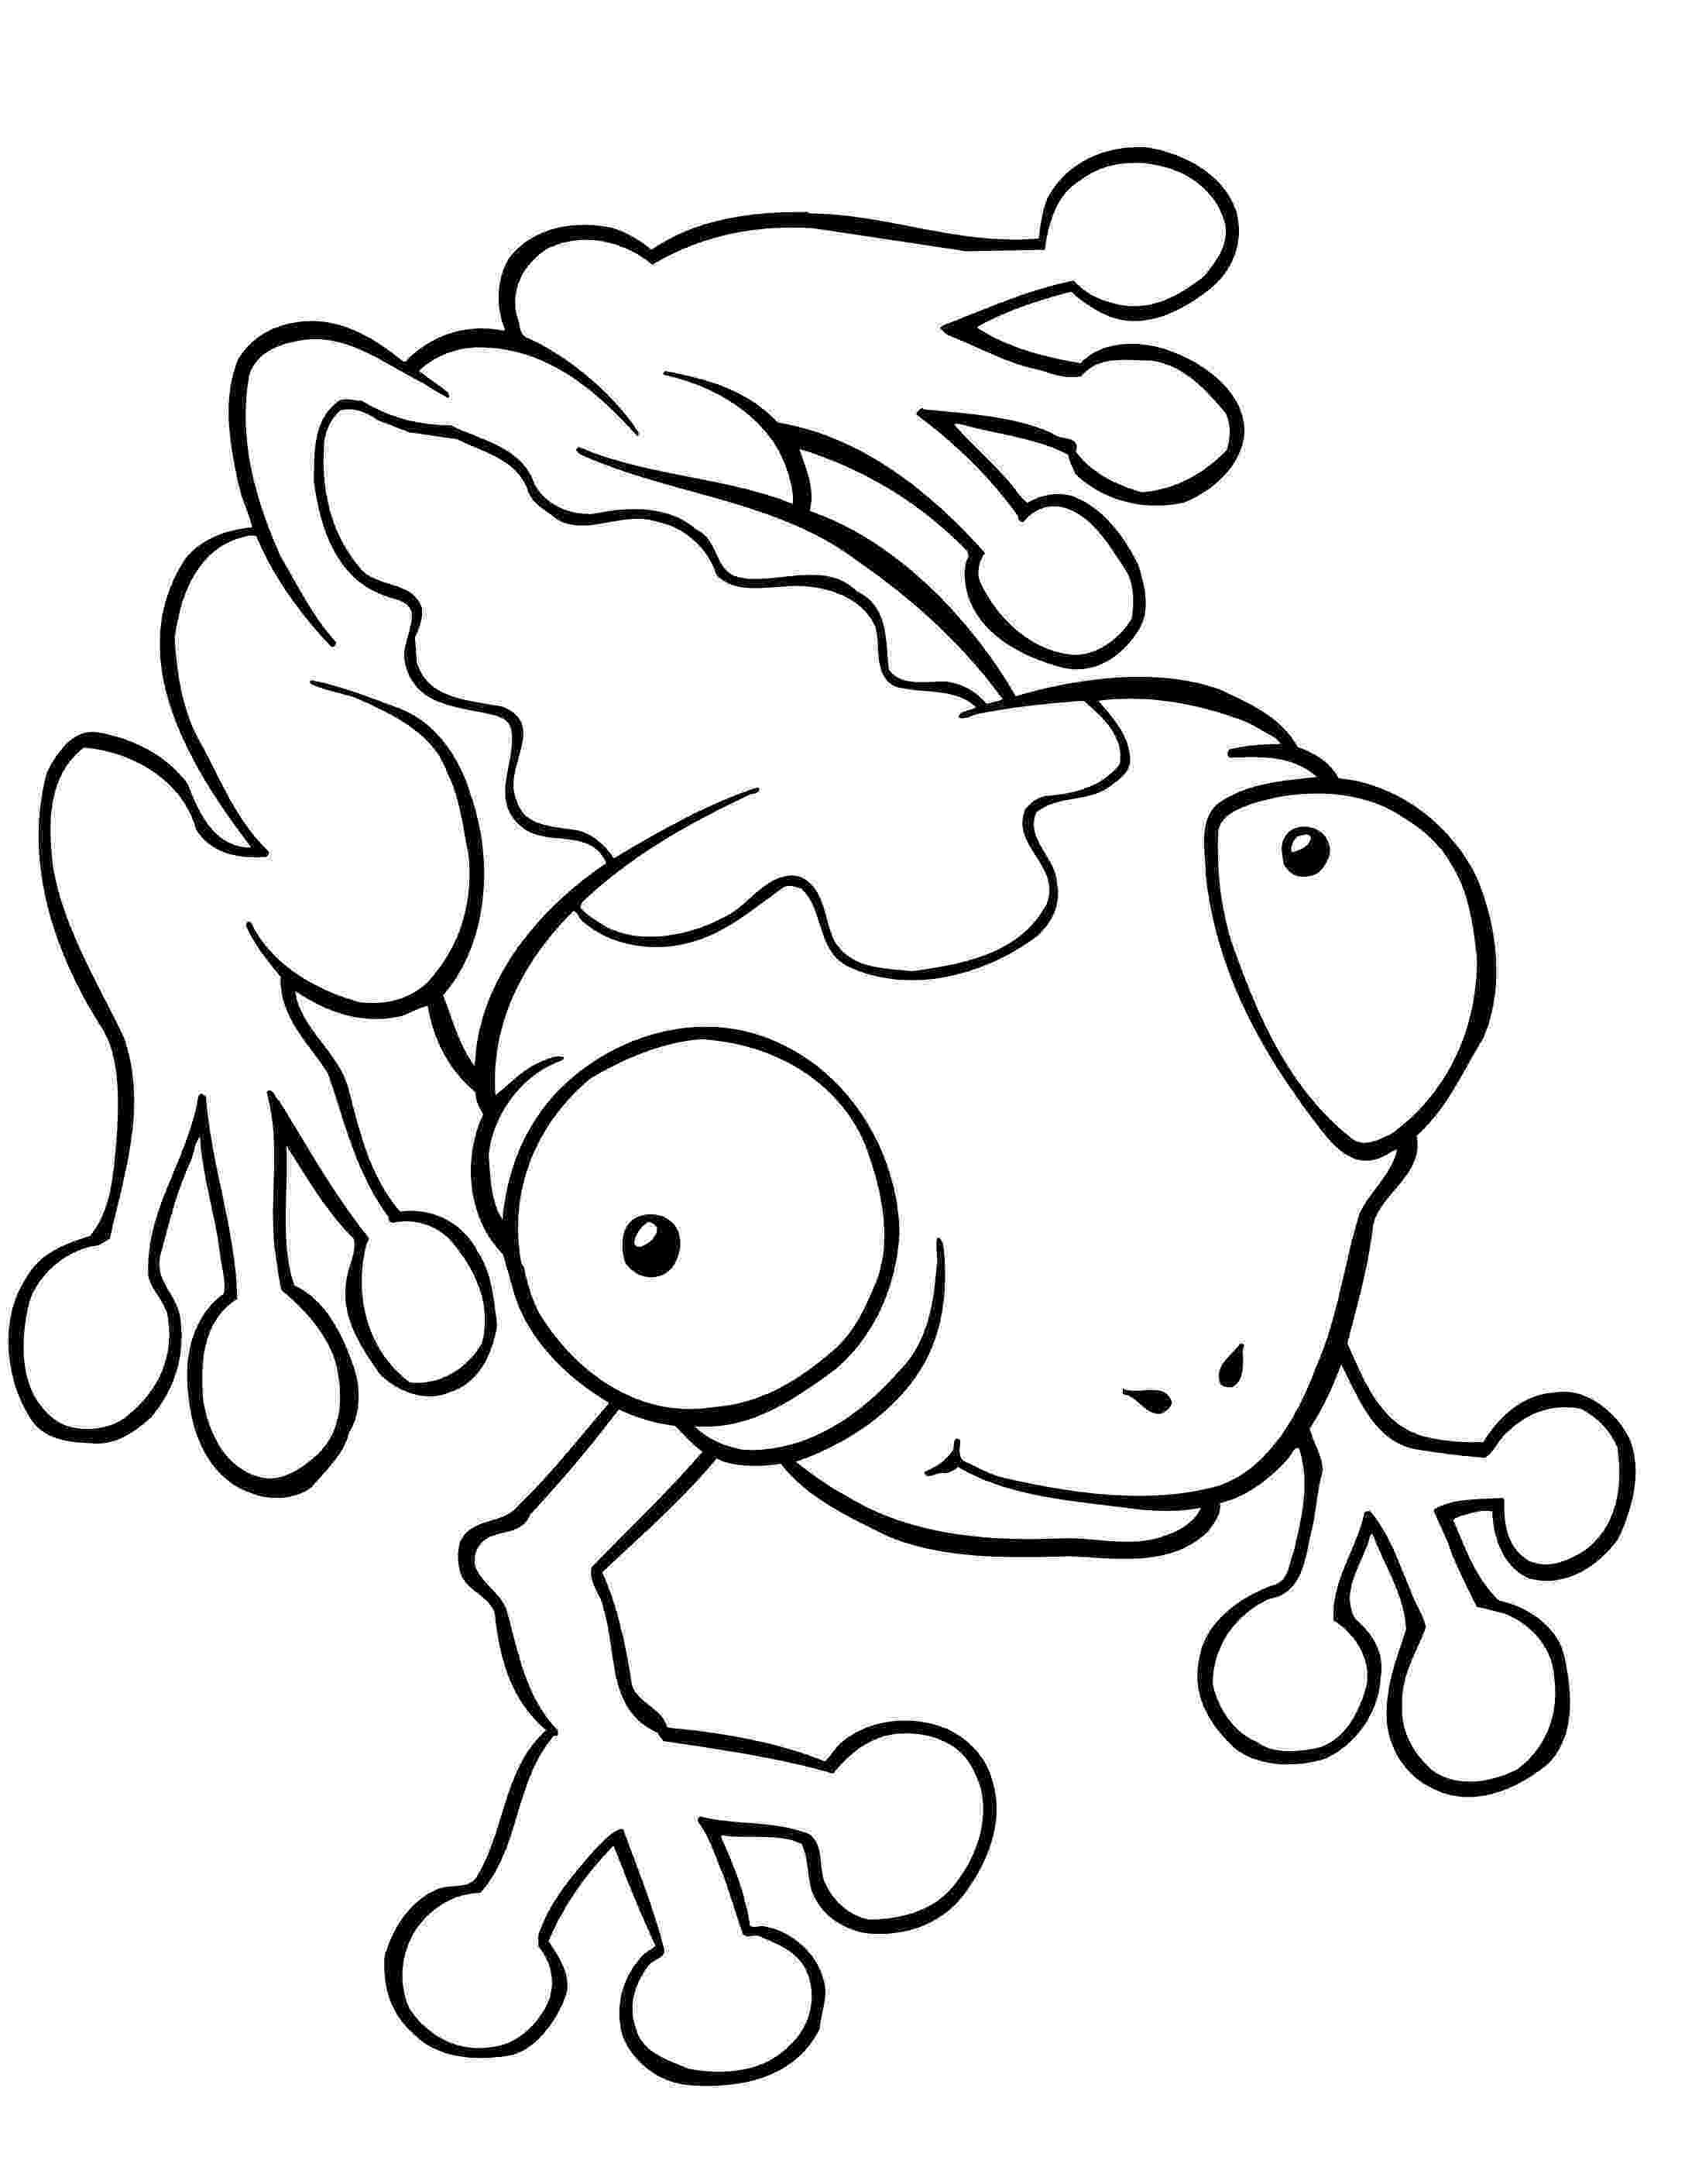 toad pictures to print free printable toad coloring pages for kids print to pictures toad 